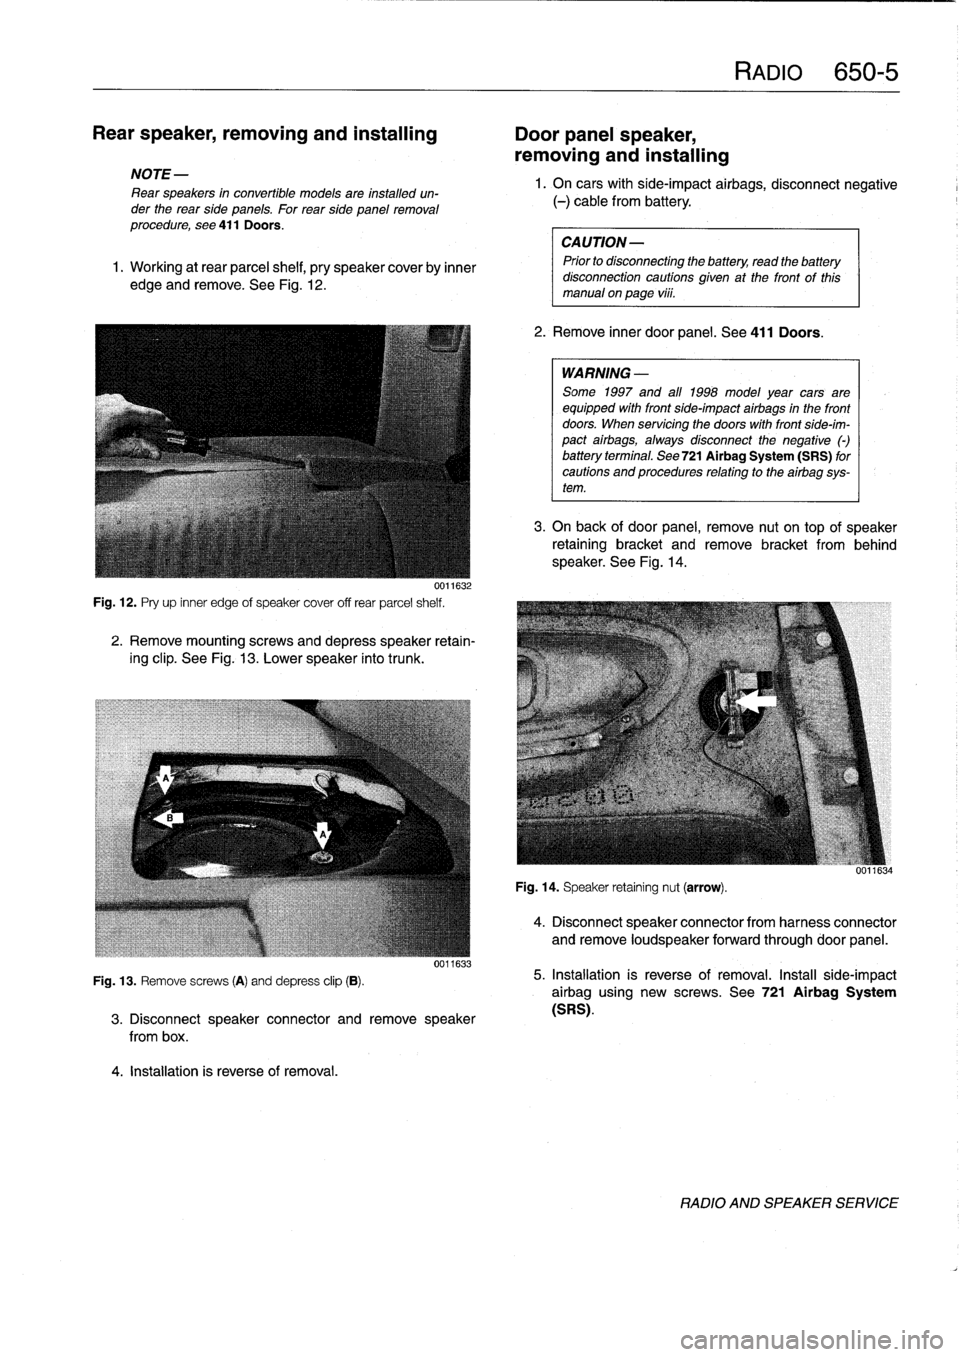 BMW 325i 1994 E36 Service Manual 
Rear
speaker,
removing
and
installing

	

Door
panel
speaker,

removing
and
installing

NOTE
-

Rear
speakers
in
convertible
models
are
installed
un-
der
the
rear
side
panels
.
For
rearside
panelremo